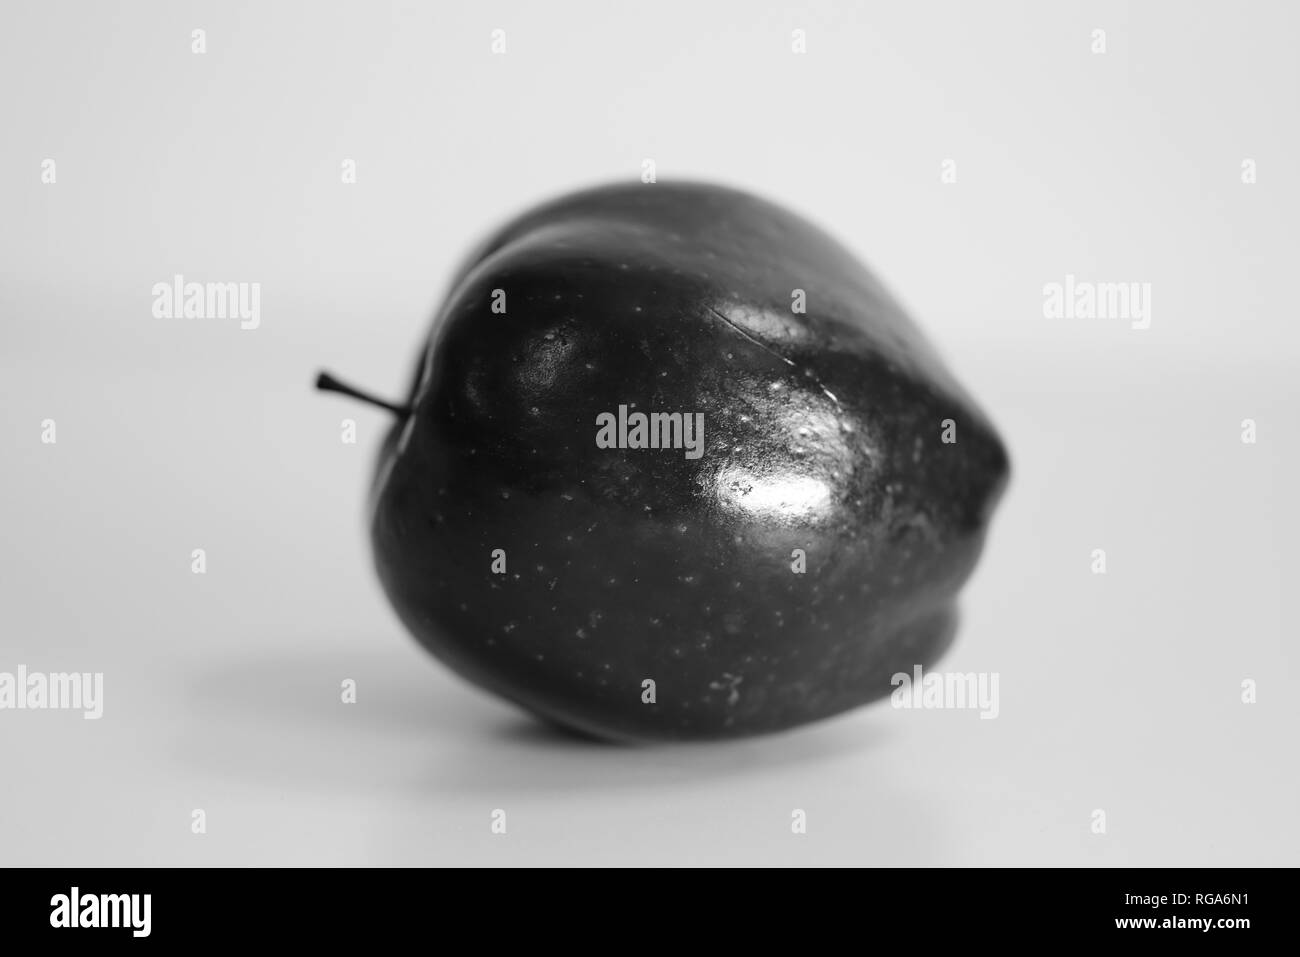 Macro photo of a Red Delicious apple. Beautiful closeup shows the details of this fruit. Black and white photo. Stock Photo